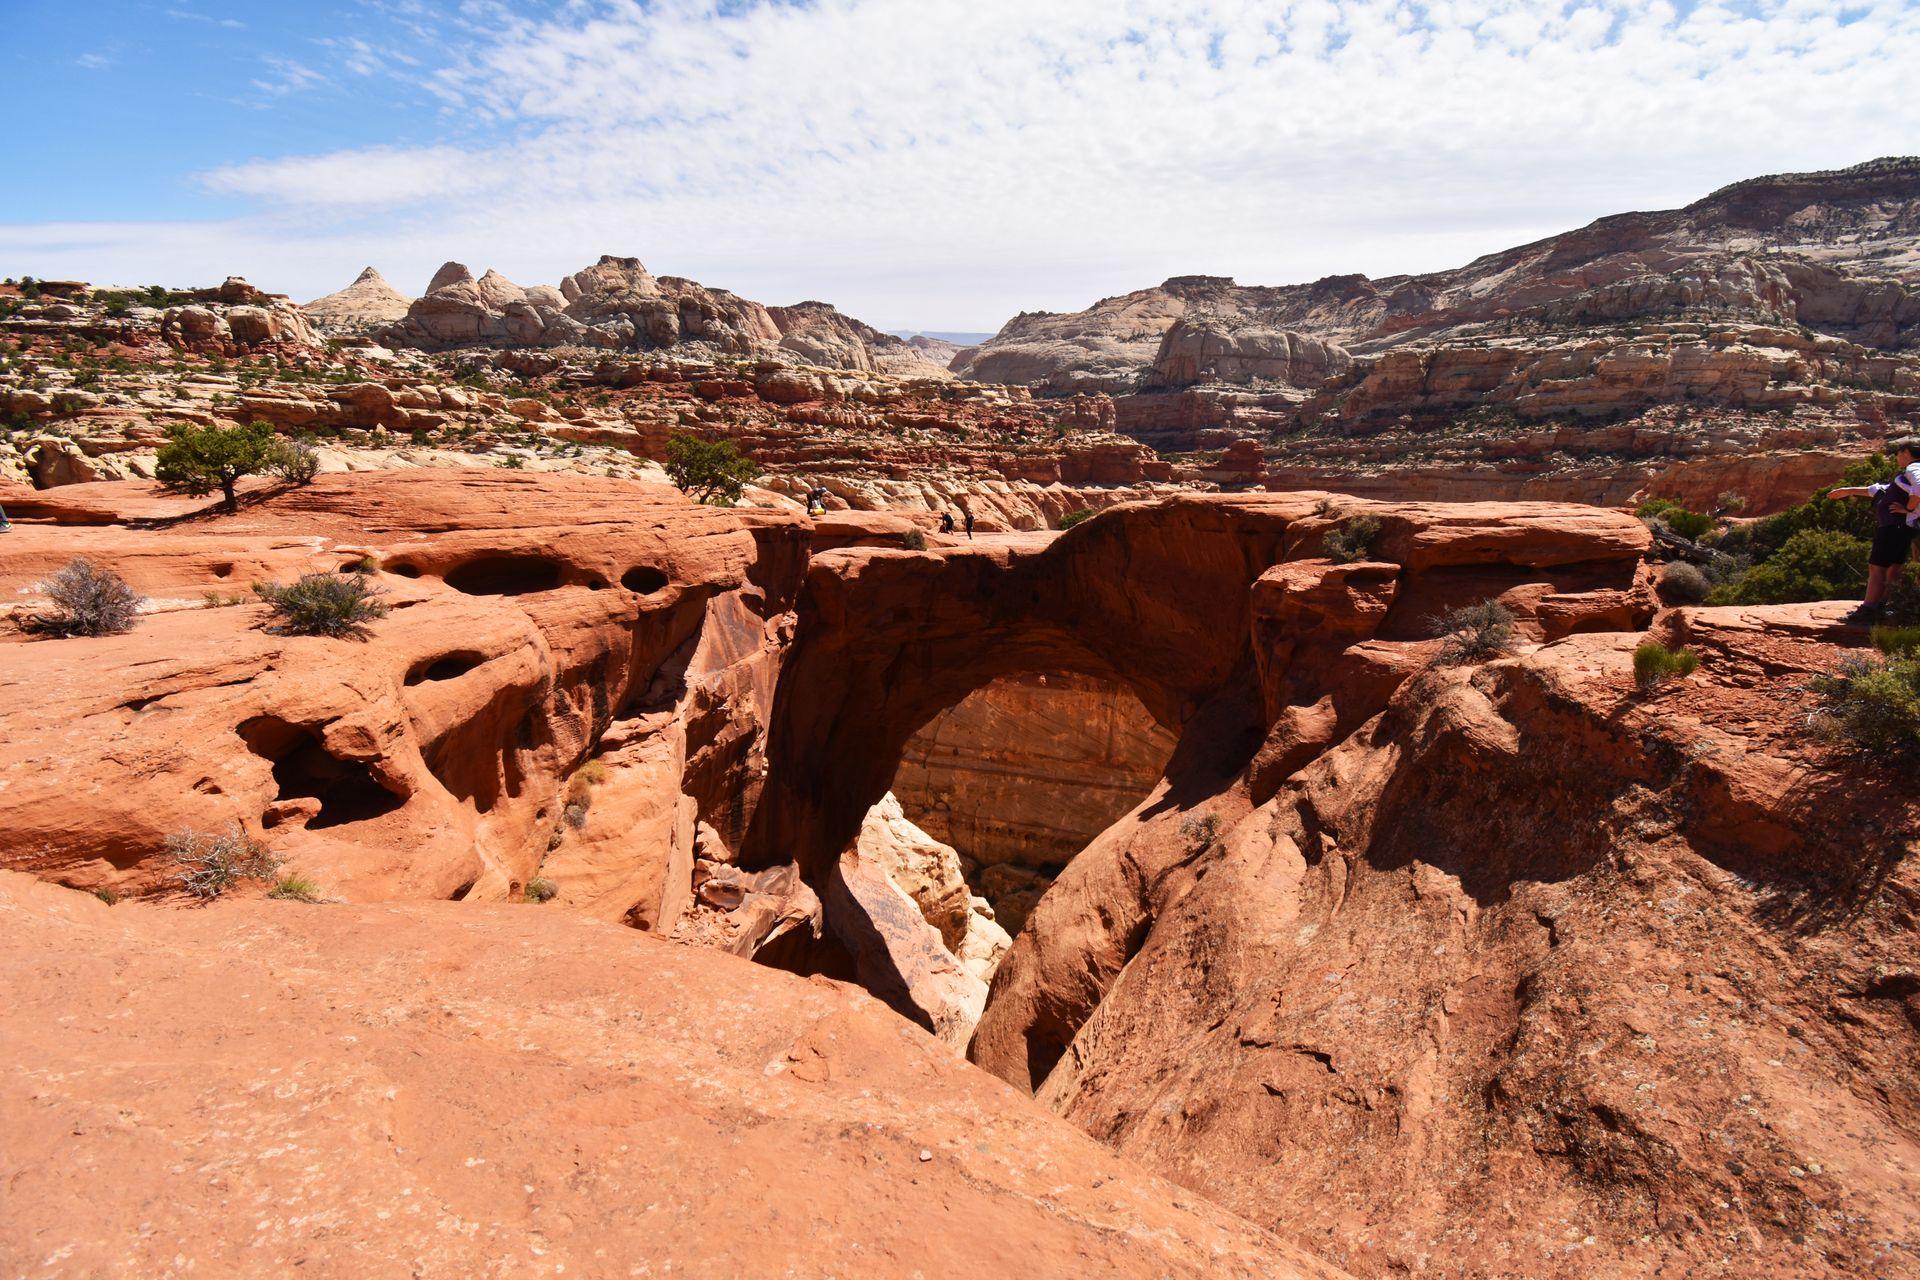 A large rock arch surrounded by orange rocks.